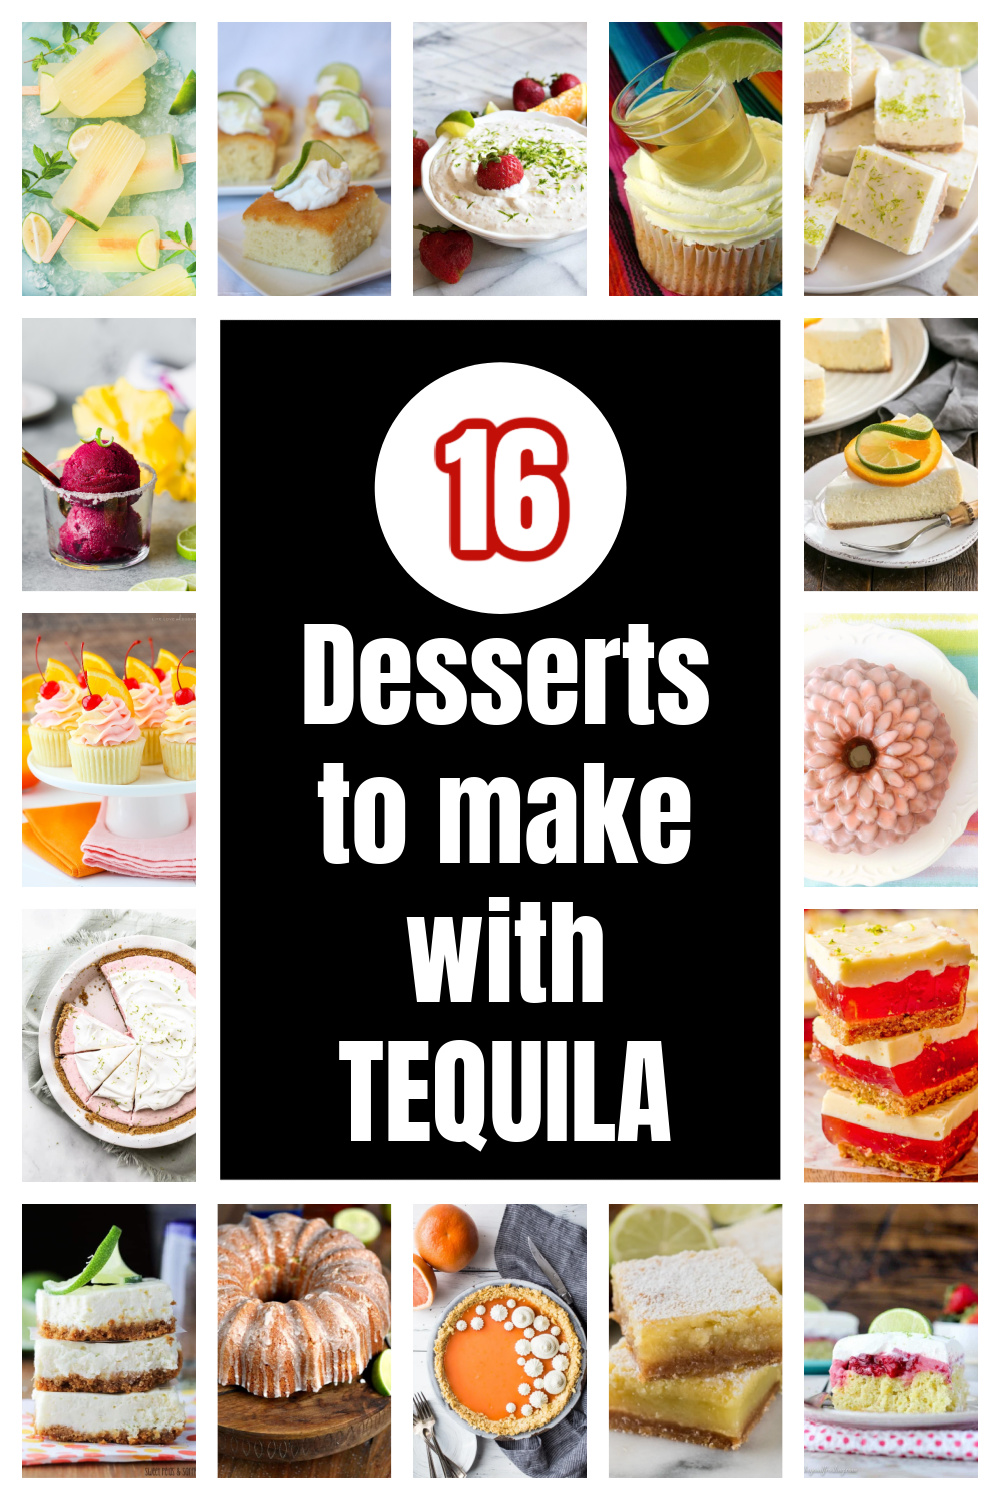 pinterest image collage 16 desserts to make with tequila